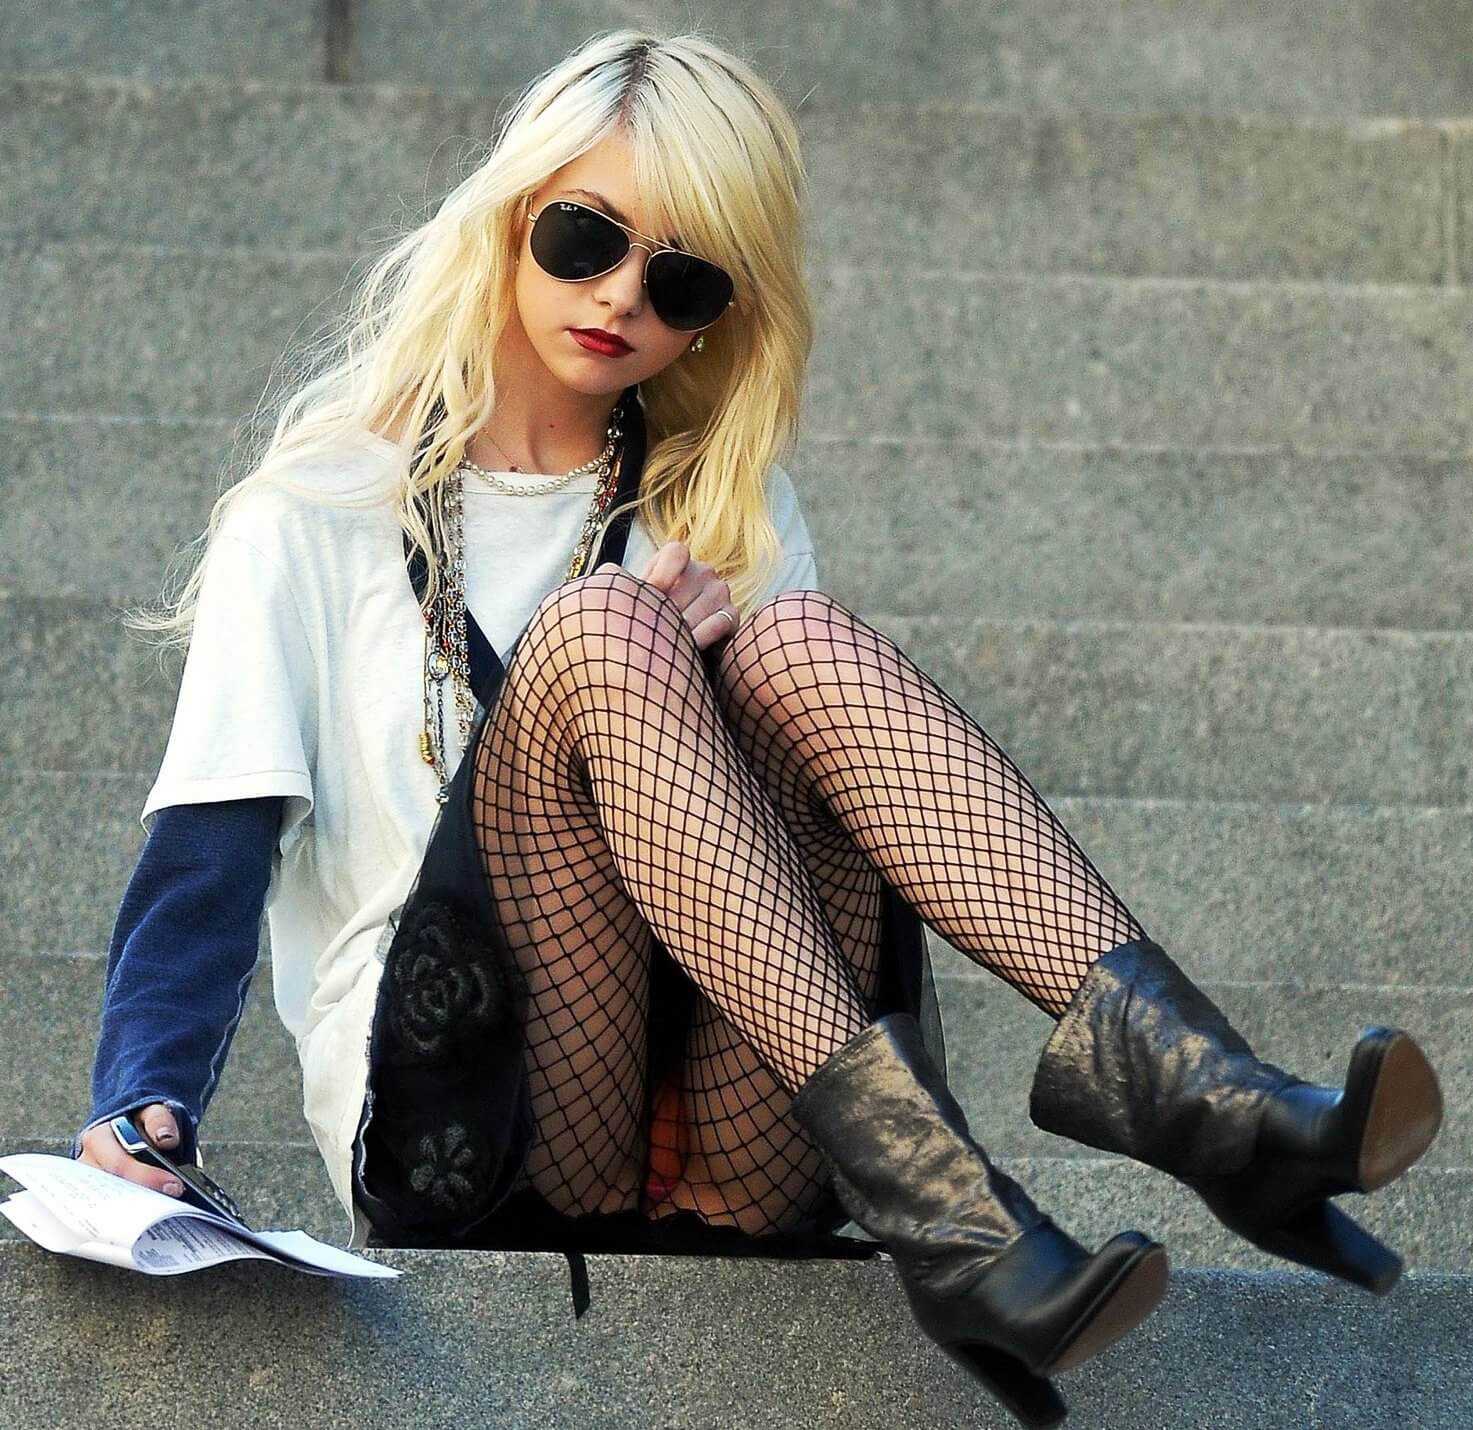 49 Taylor Momsen Nude Pictures Will Make You Crave For More 50